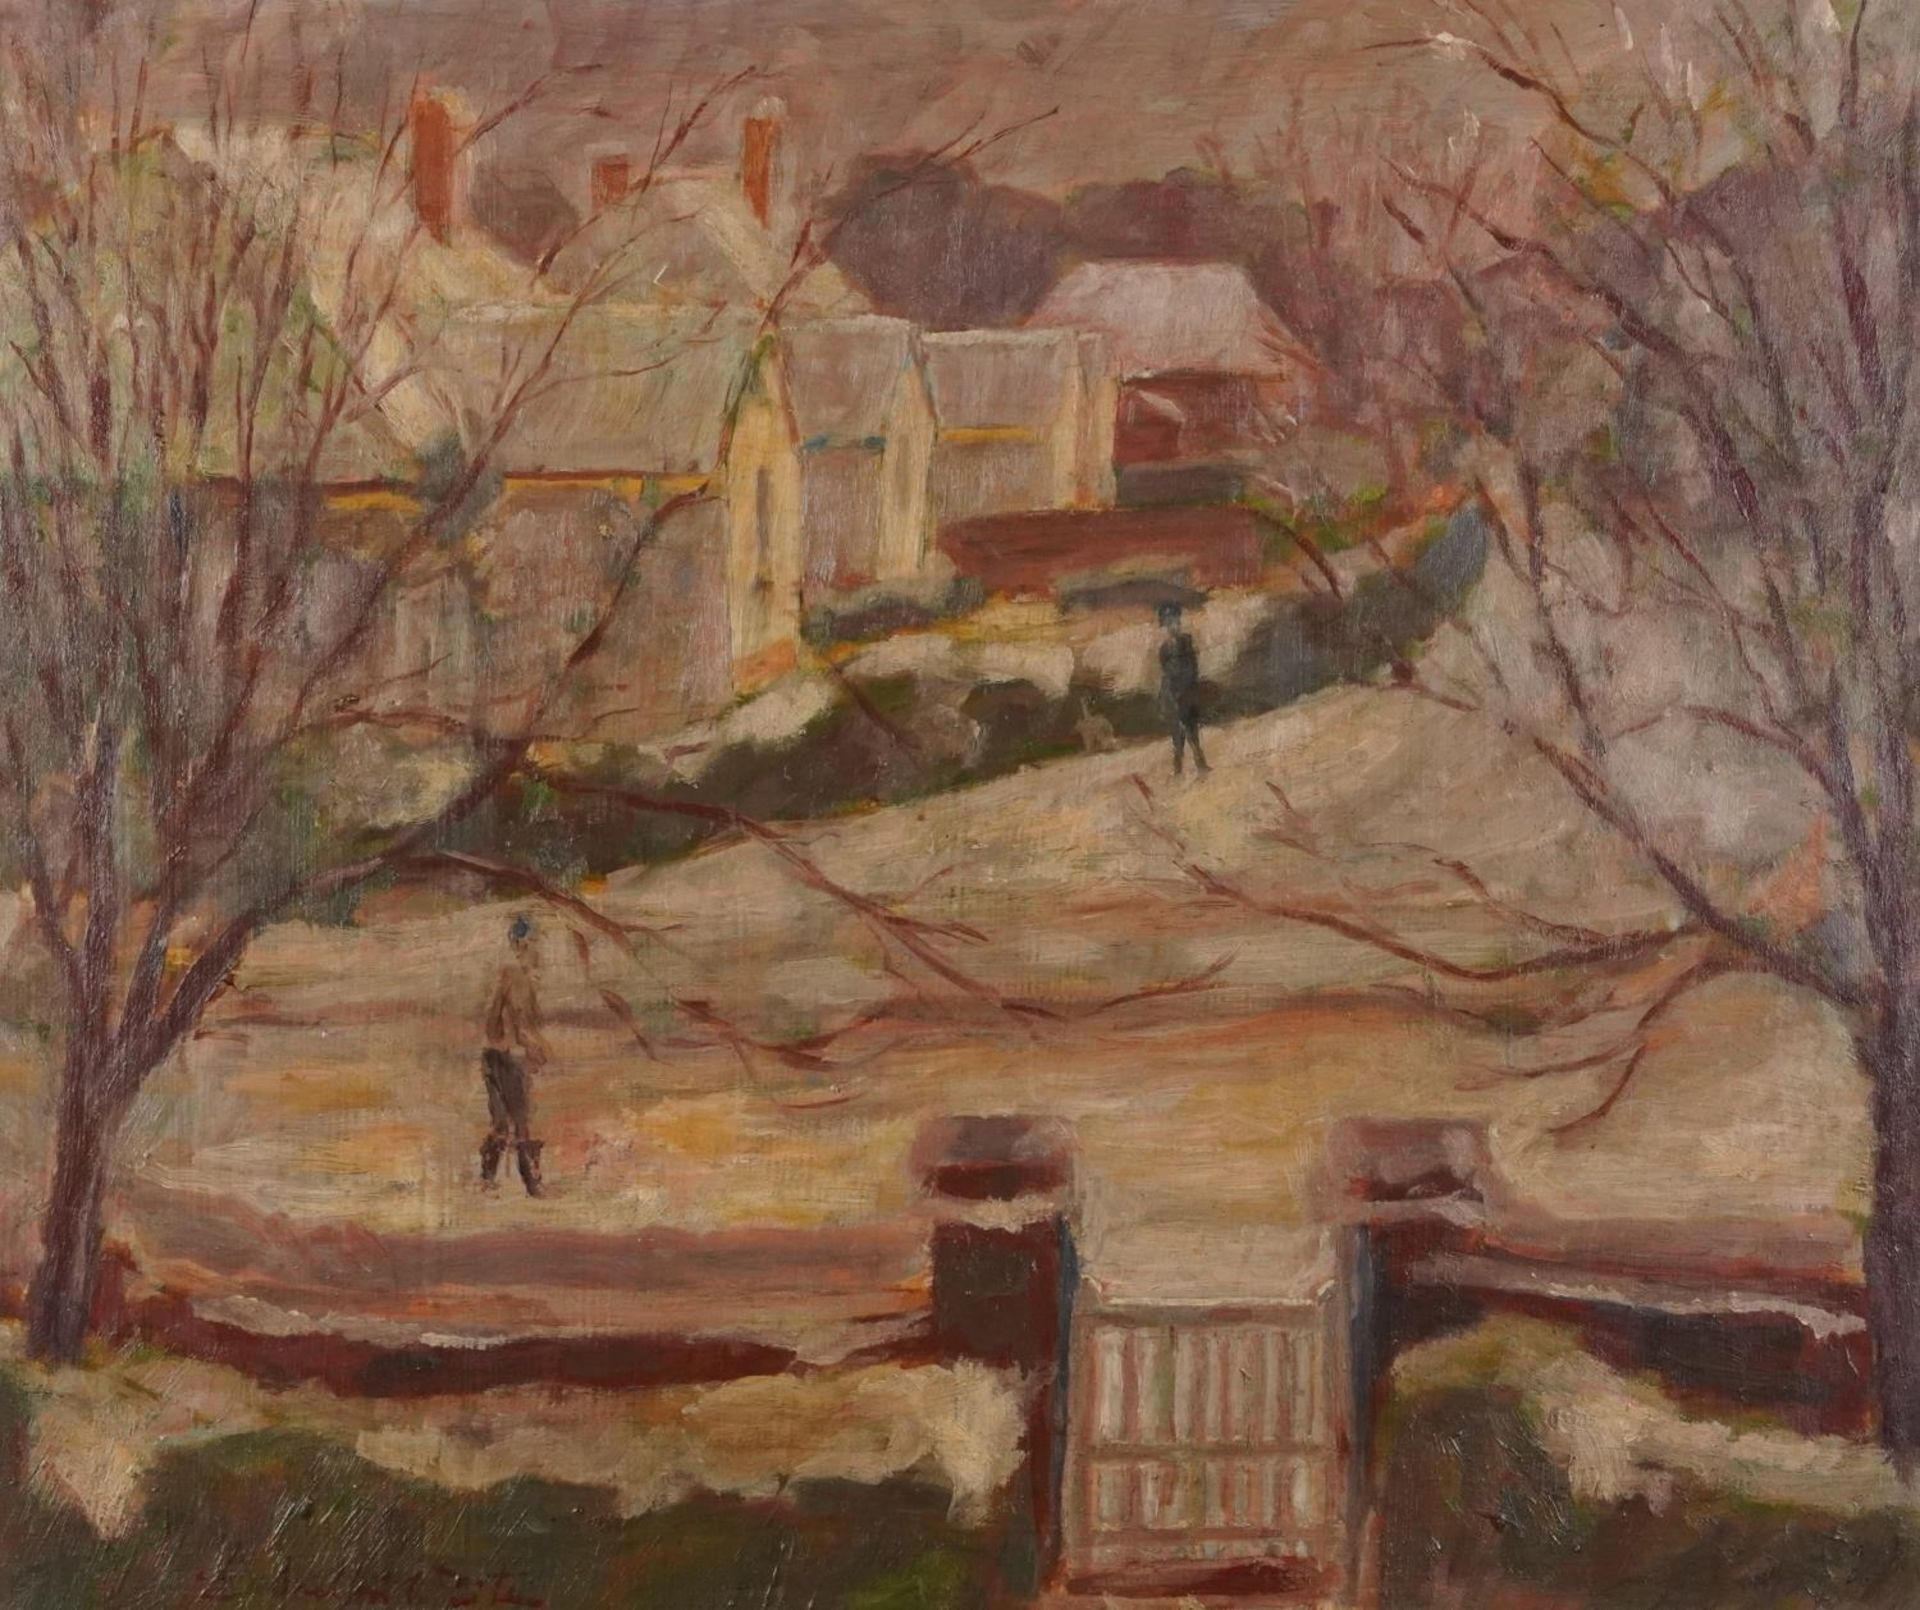 Winter street scene with two figures, oil on board, mounted and framed, 60cm x 49.5cm excluding